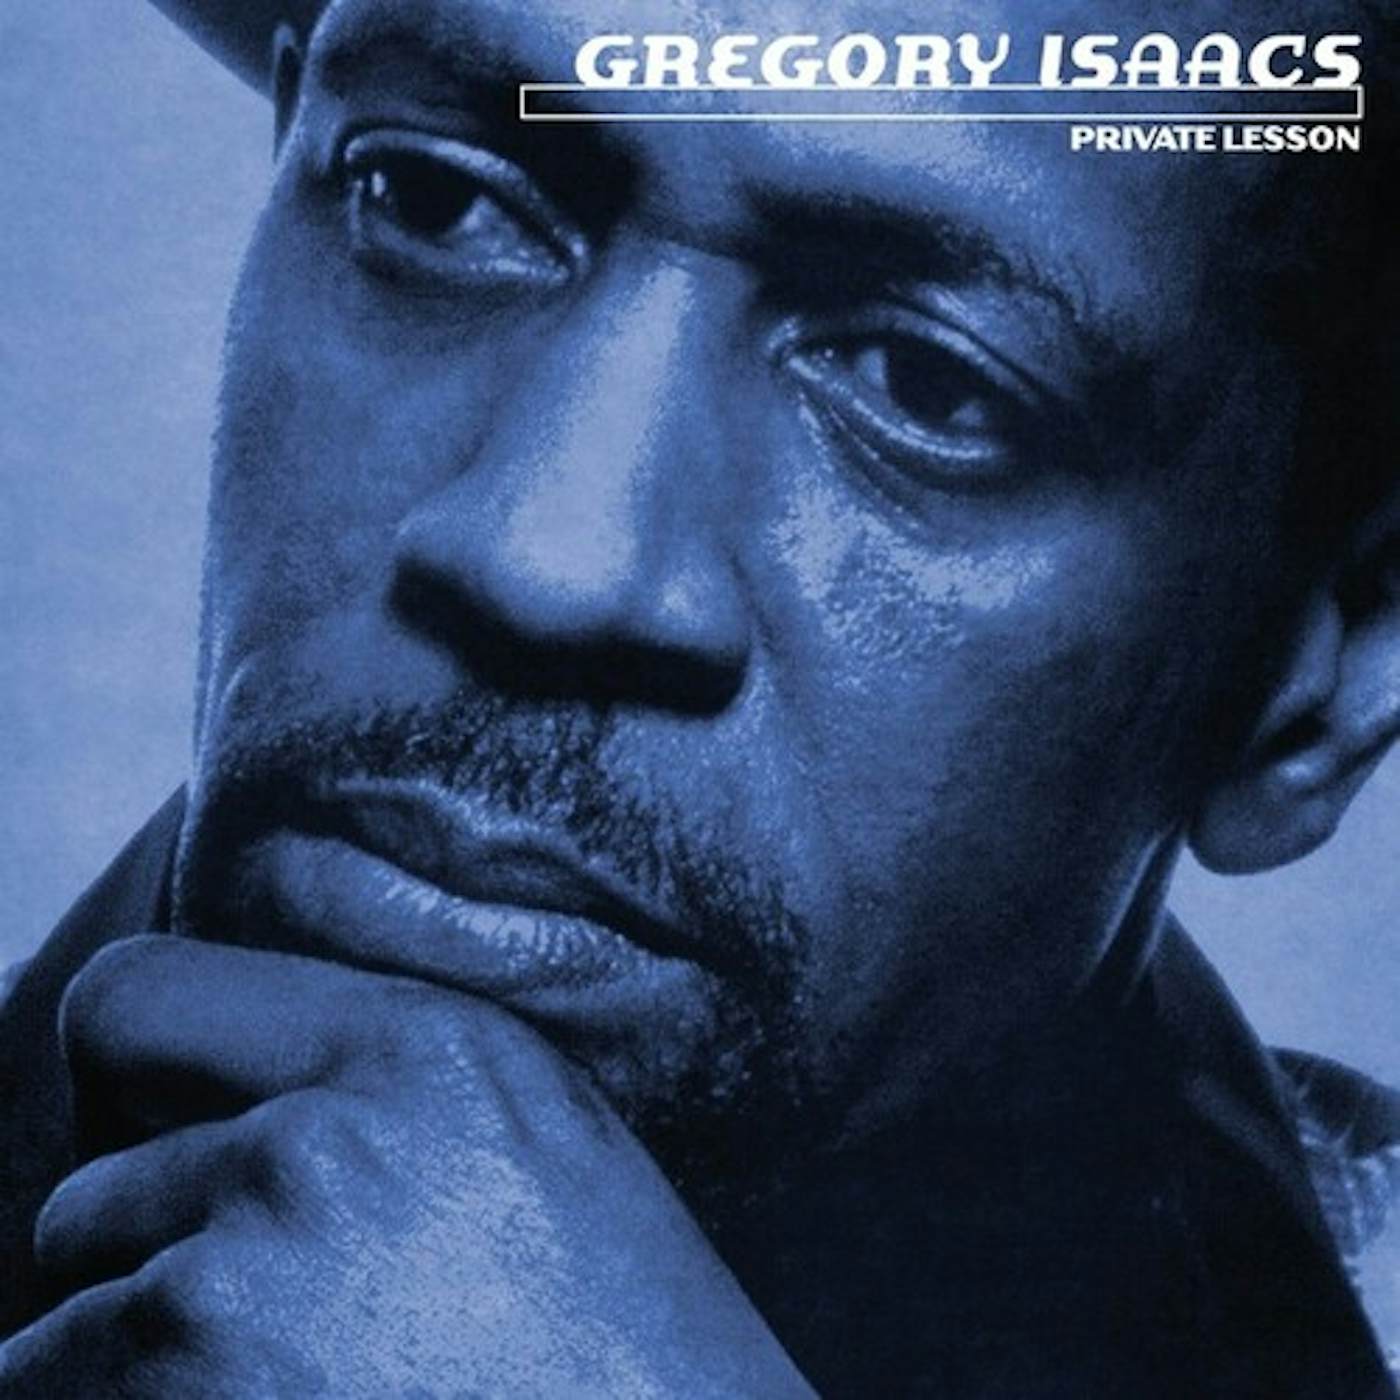 Gregory Isaacs Private Lesson Vinyl Record